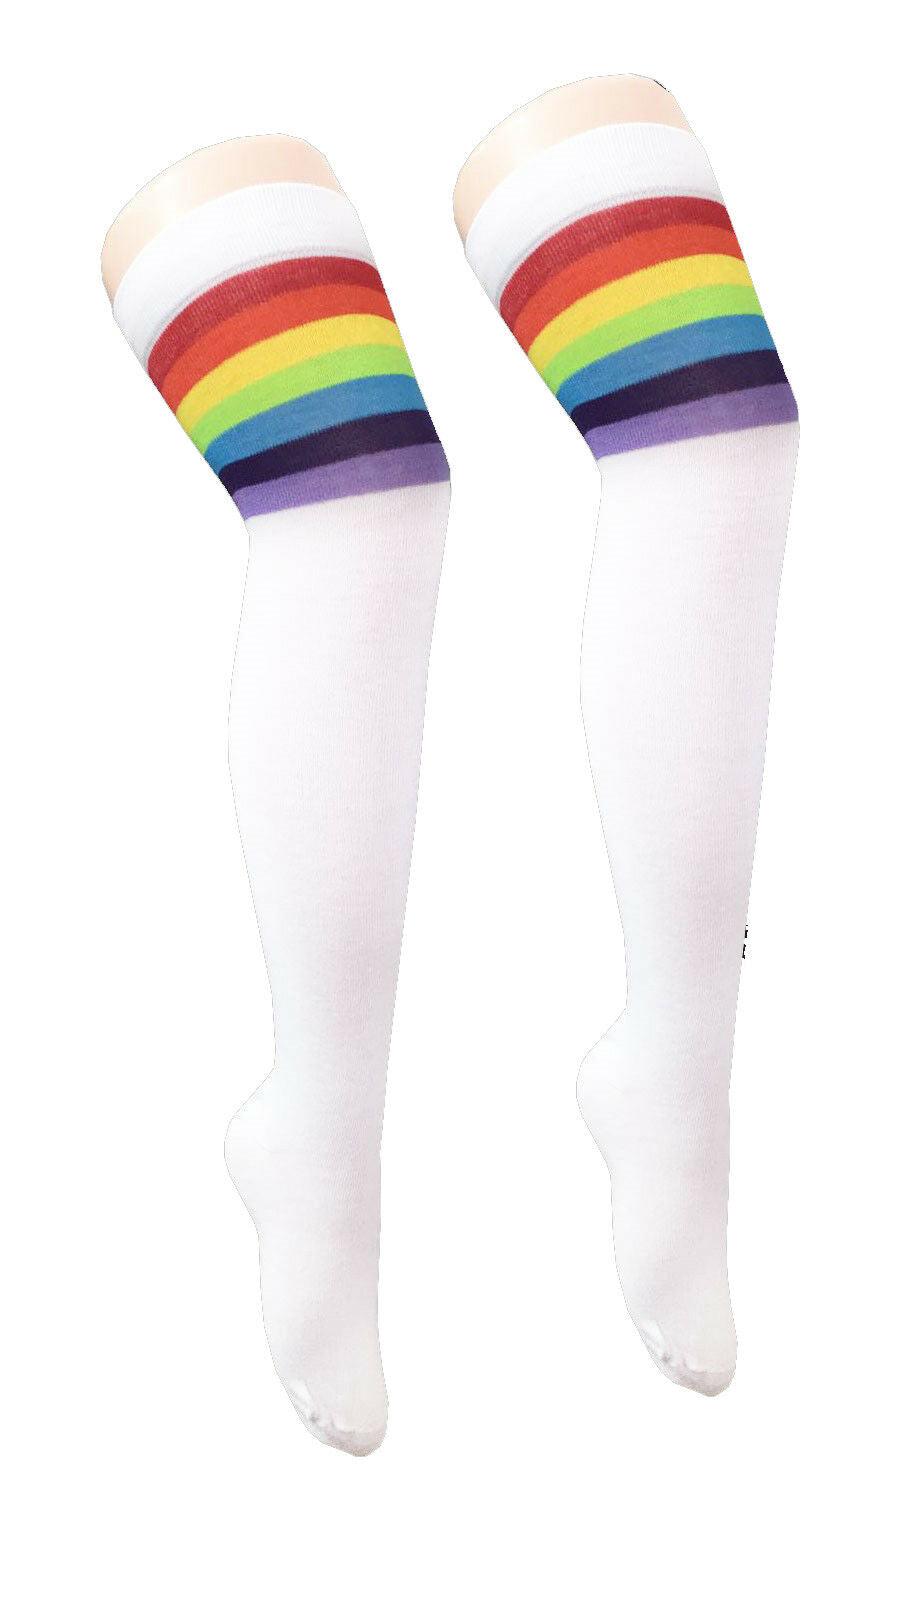 Ladies Referee White and Rainbow Thigh High Girls Stretchy Over the Knee Socks - Labreeze